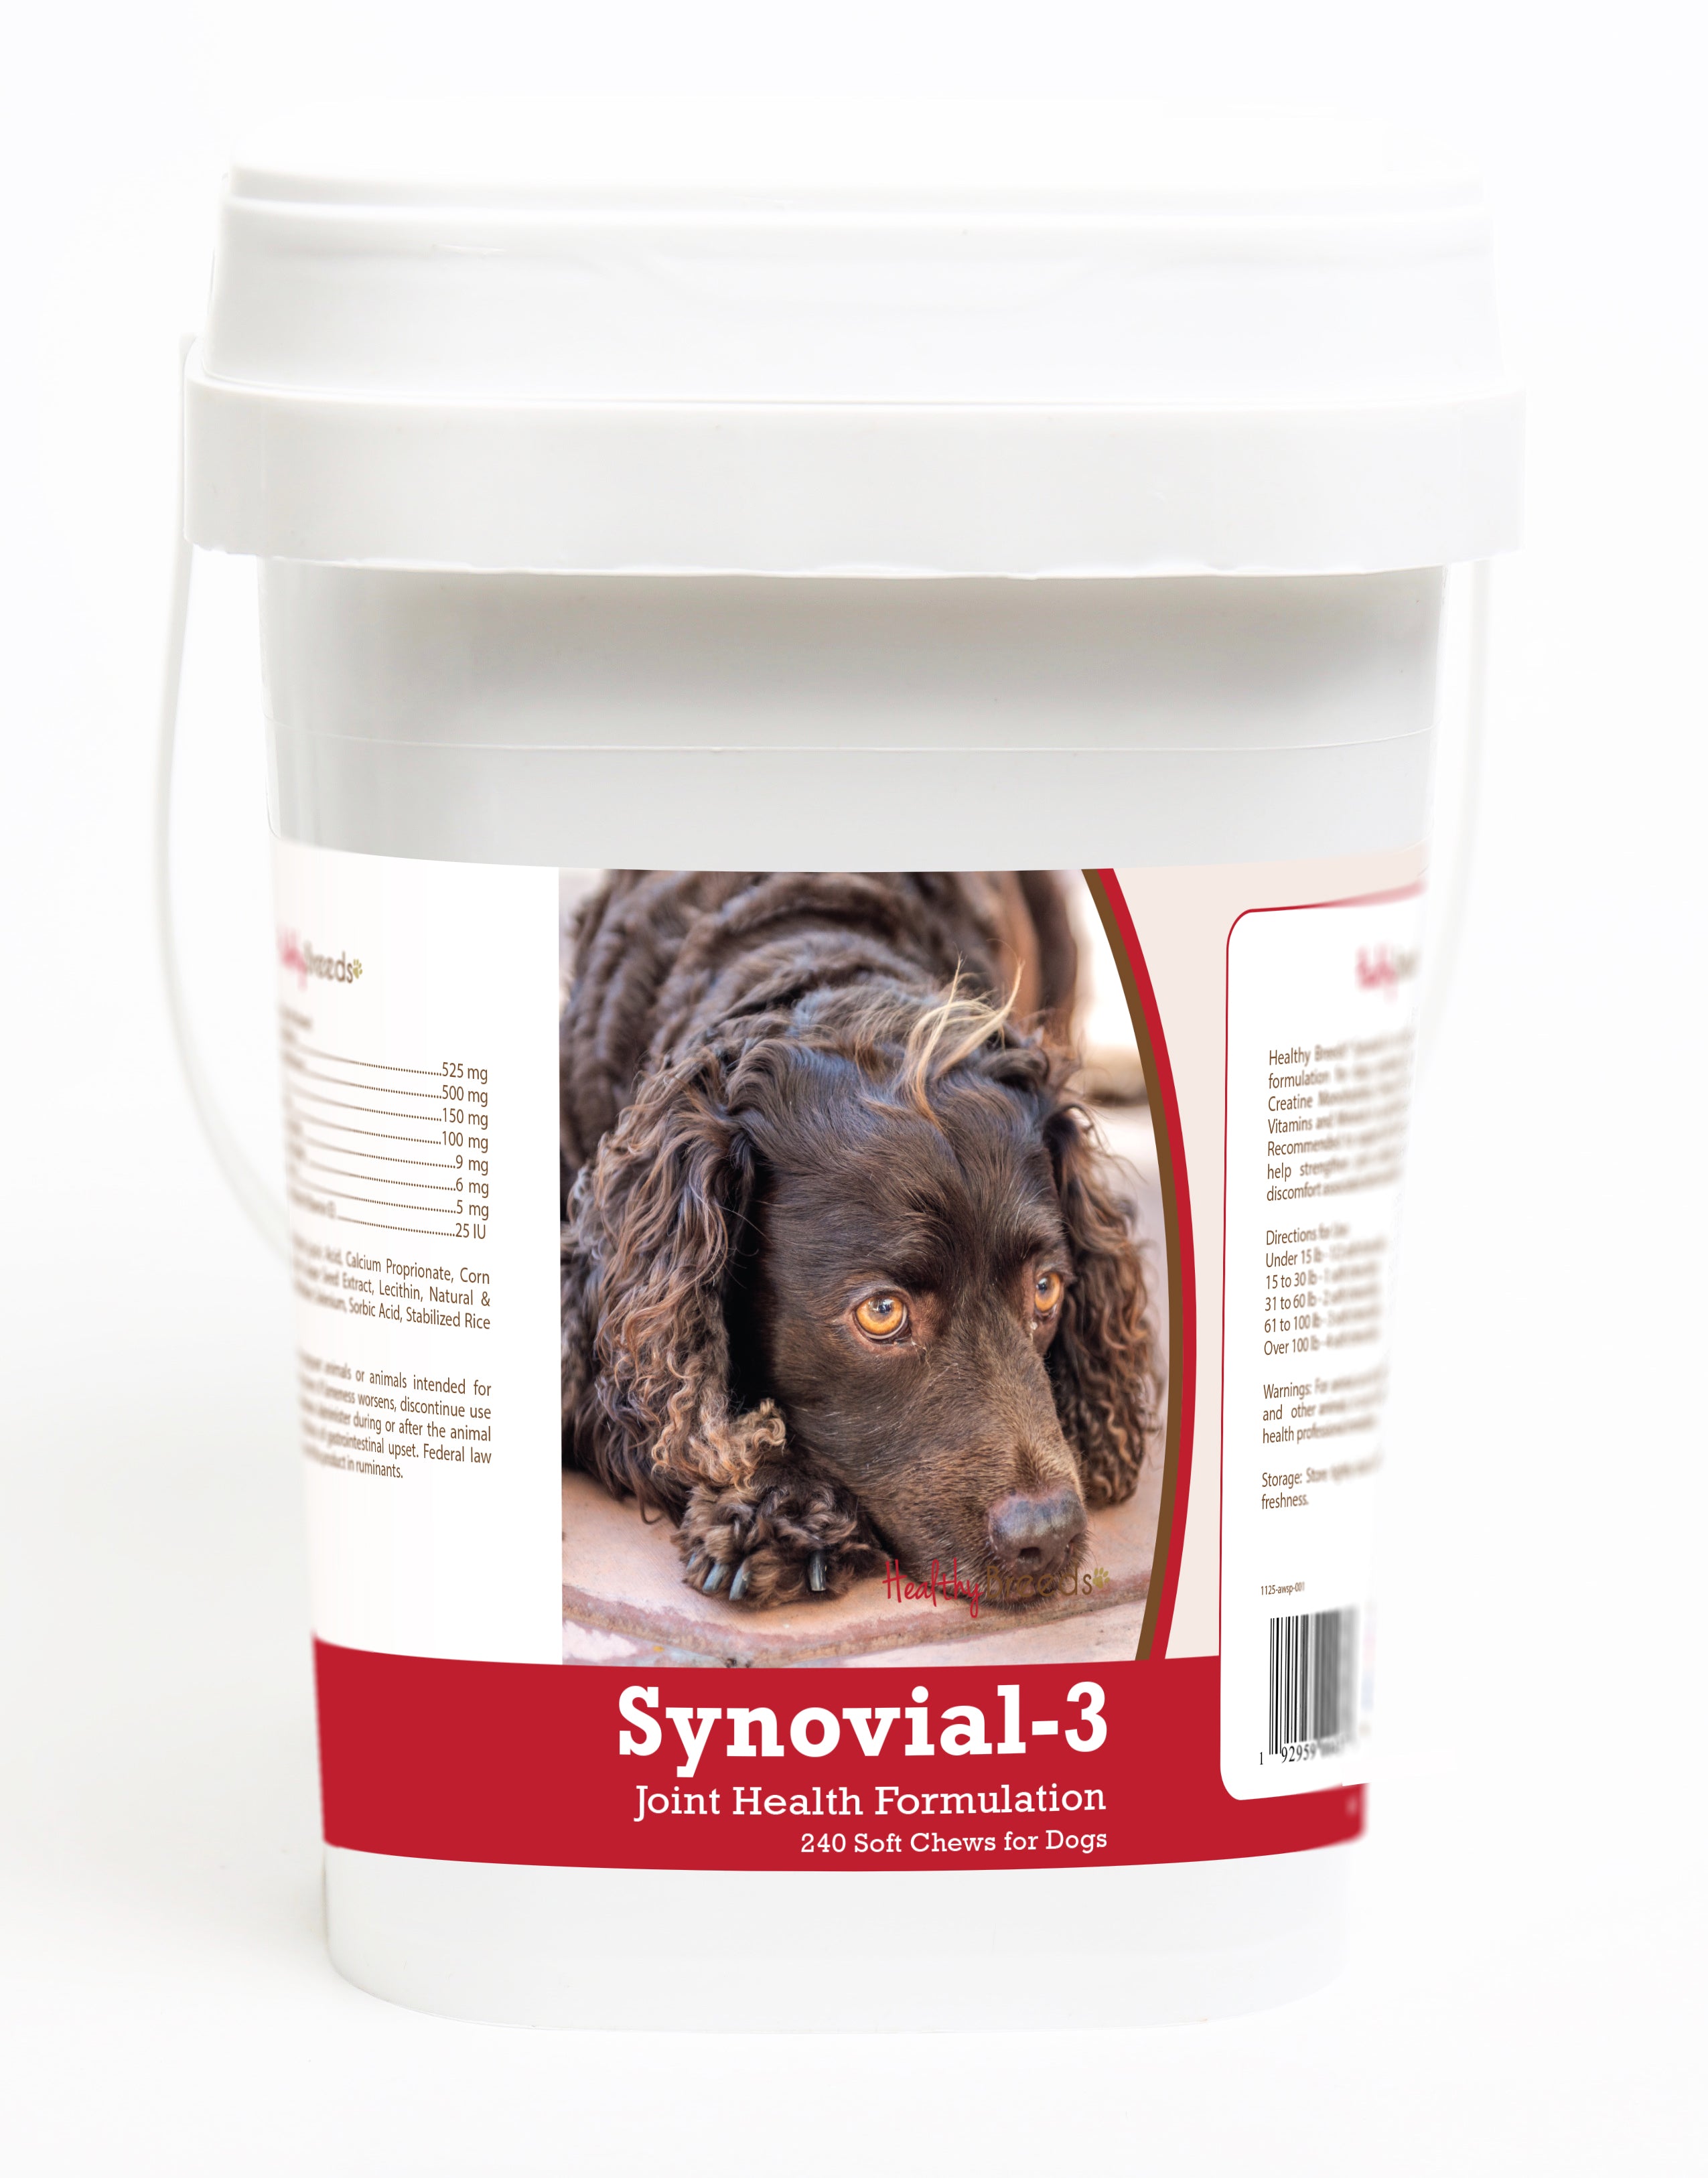 American Water Spaniel Synovial-3 Joint Health Formulation Soft Chews 240 Count